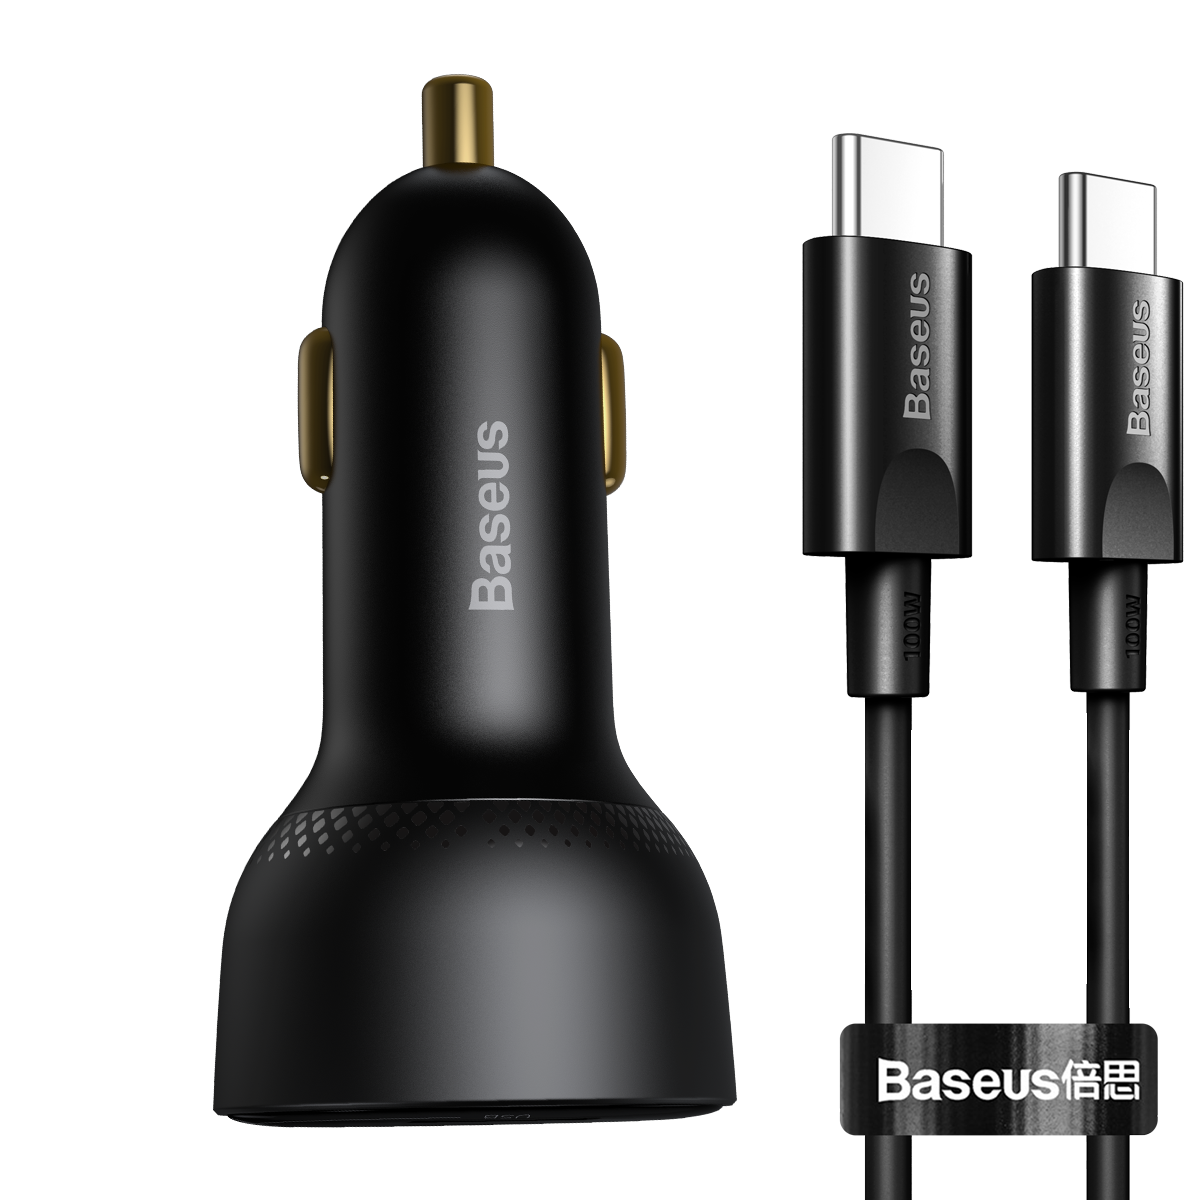 Baseus 100W 2-Port USB PD Car Charger Adapter 100W USB-C PD QC4.0 30W QC3.0 Support AFC FCP SCP PPS 